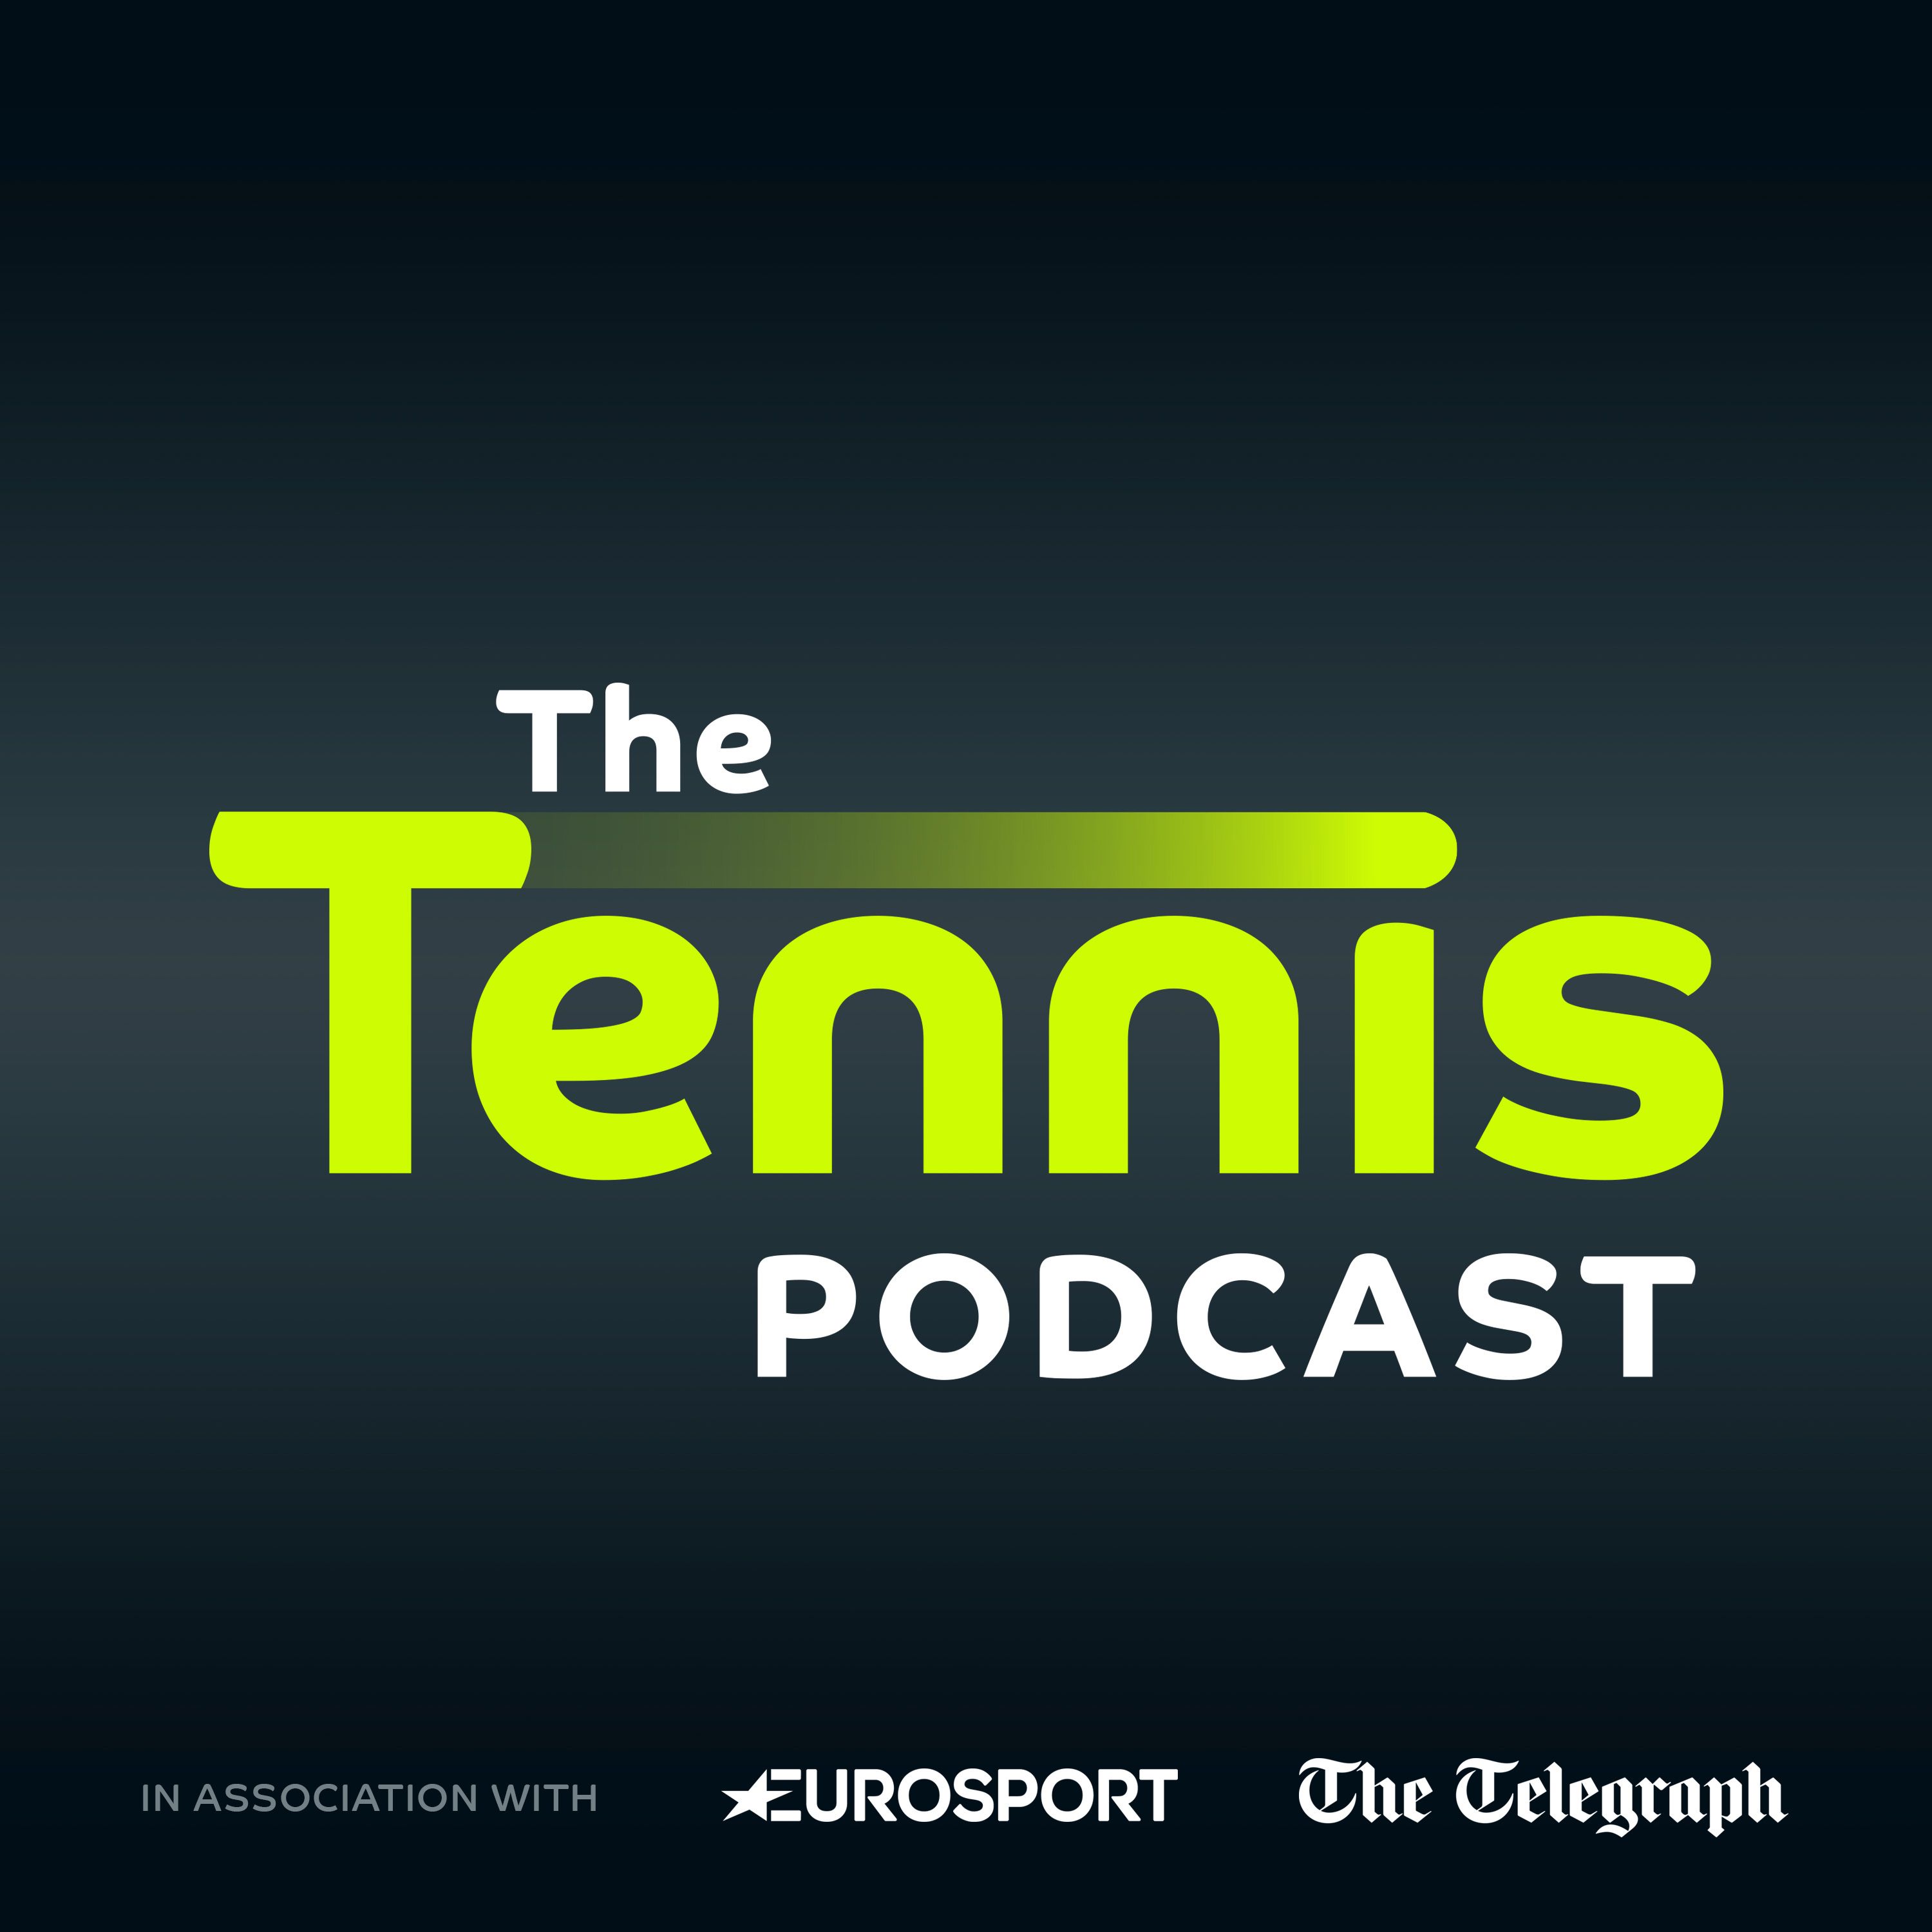 Davis Cup Reforms - Gerard Pique & ITF team up to create proposed ’World Cup of Tennis’; Nadal Out Until the clay - Could it be a blessing in disguise?; Bouchard - The settlement, the tweet and the wi